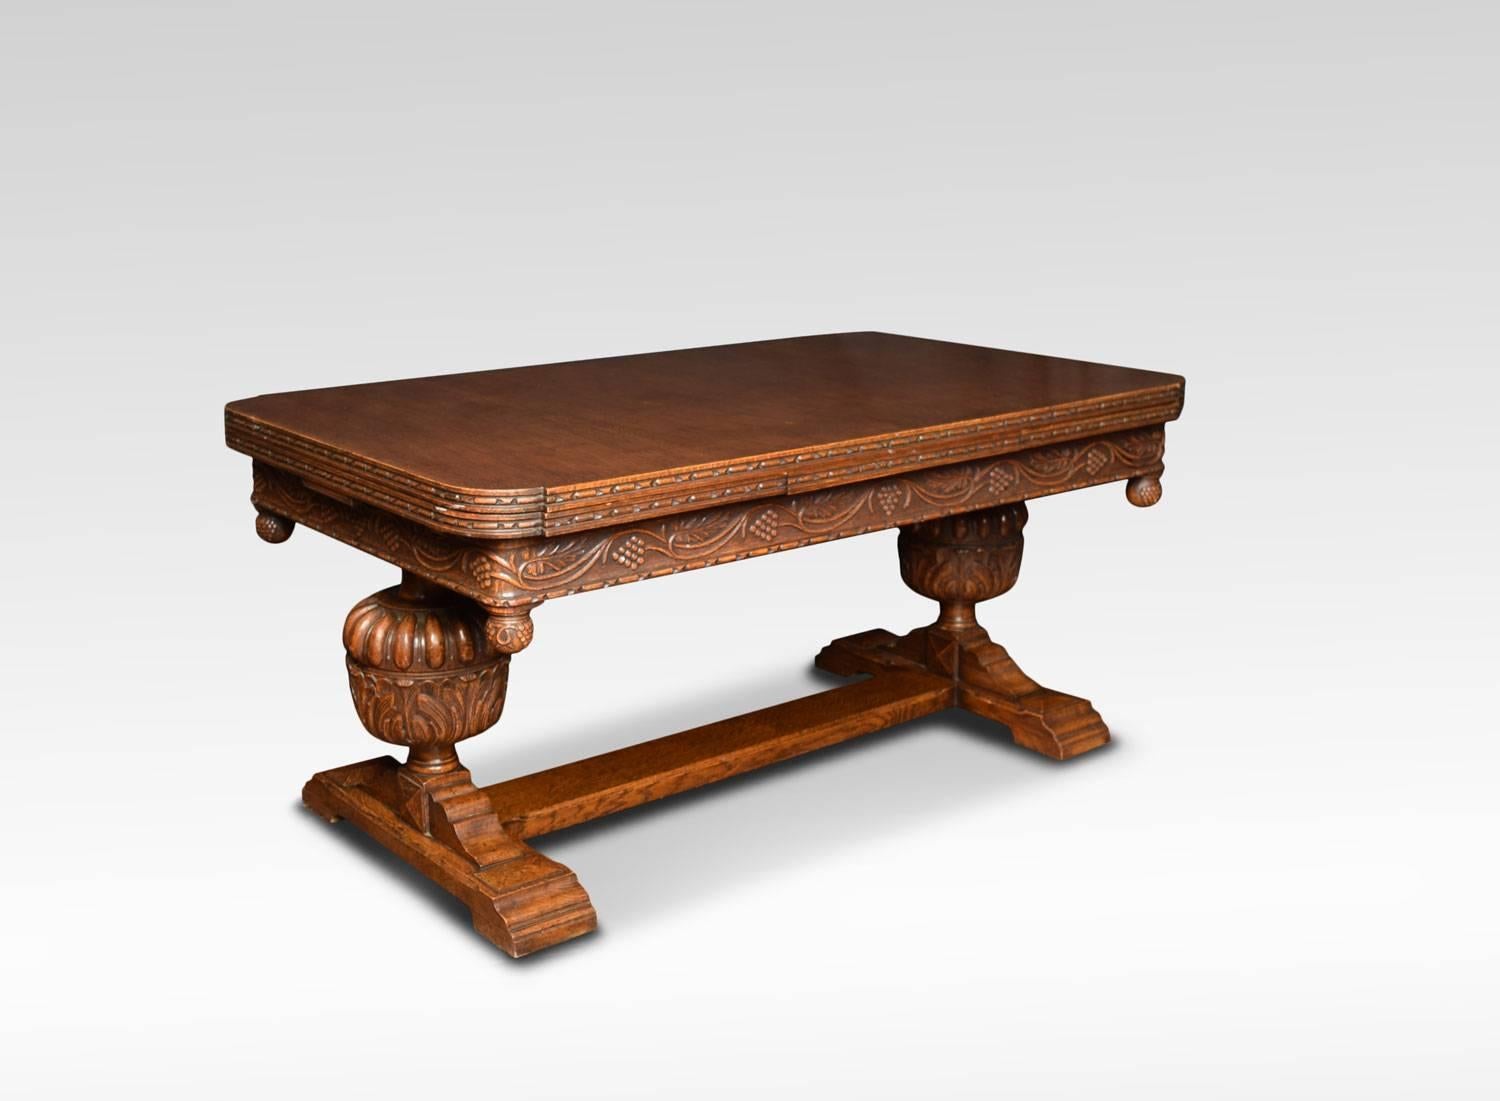 Impressive oak drawer leaf table the large rectangular pull-out top with rounded corners to the frieze decorated with grape and leaf carving. All raised up on substantial bulbous supports terminating in trestle base.
Measure: Height 31